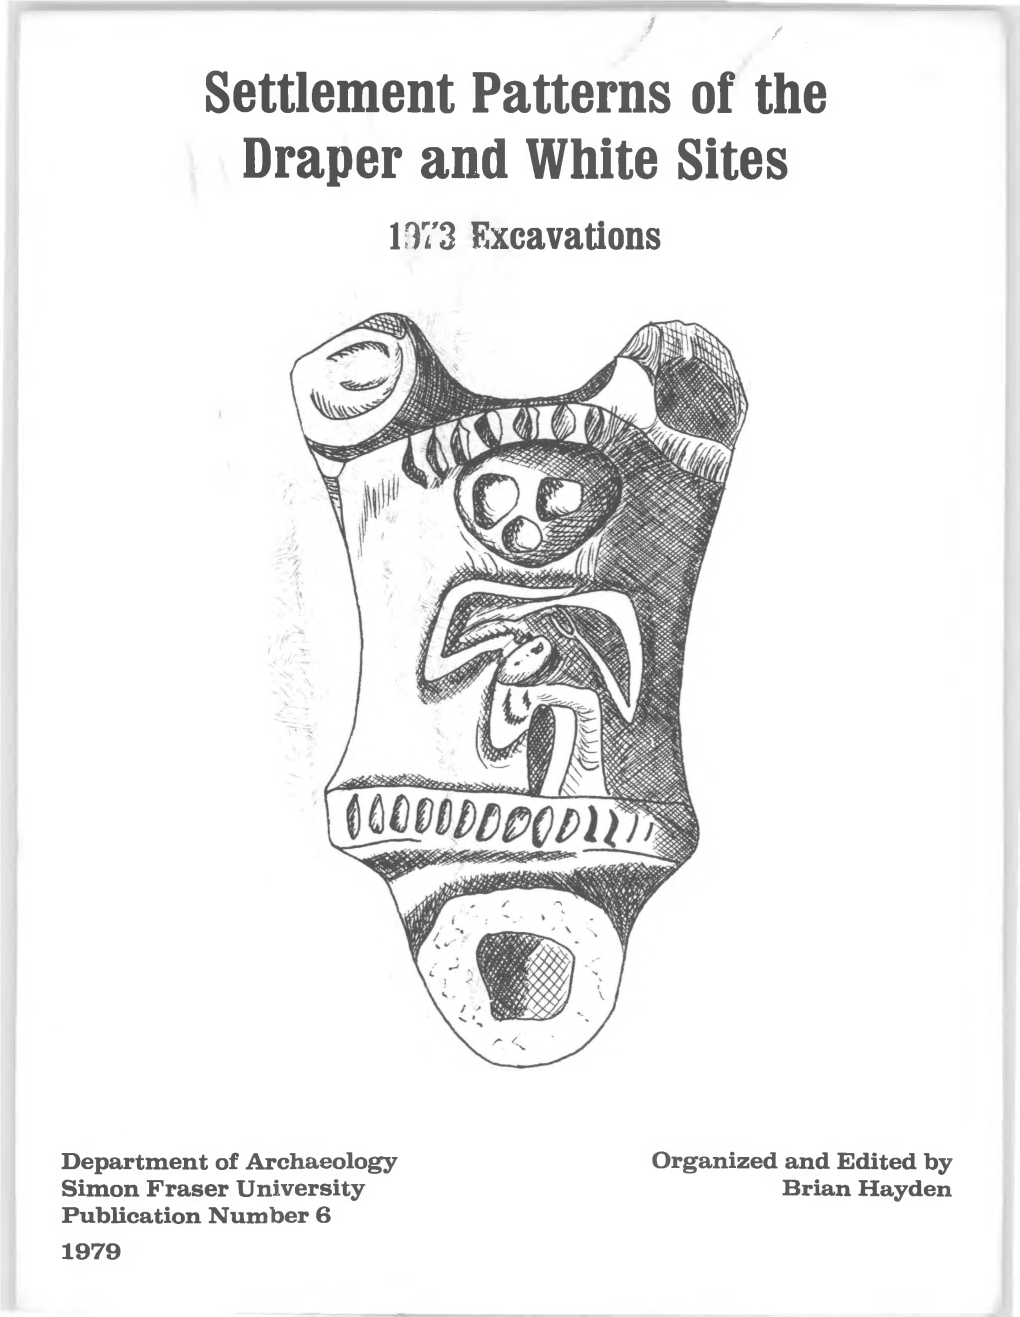 Settlement Patterns of the Draper and White Sites 1173 Excavations